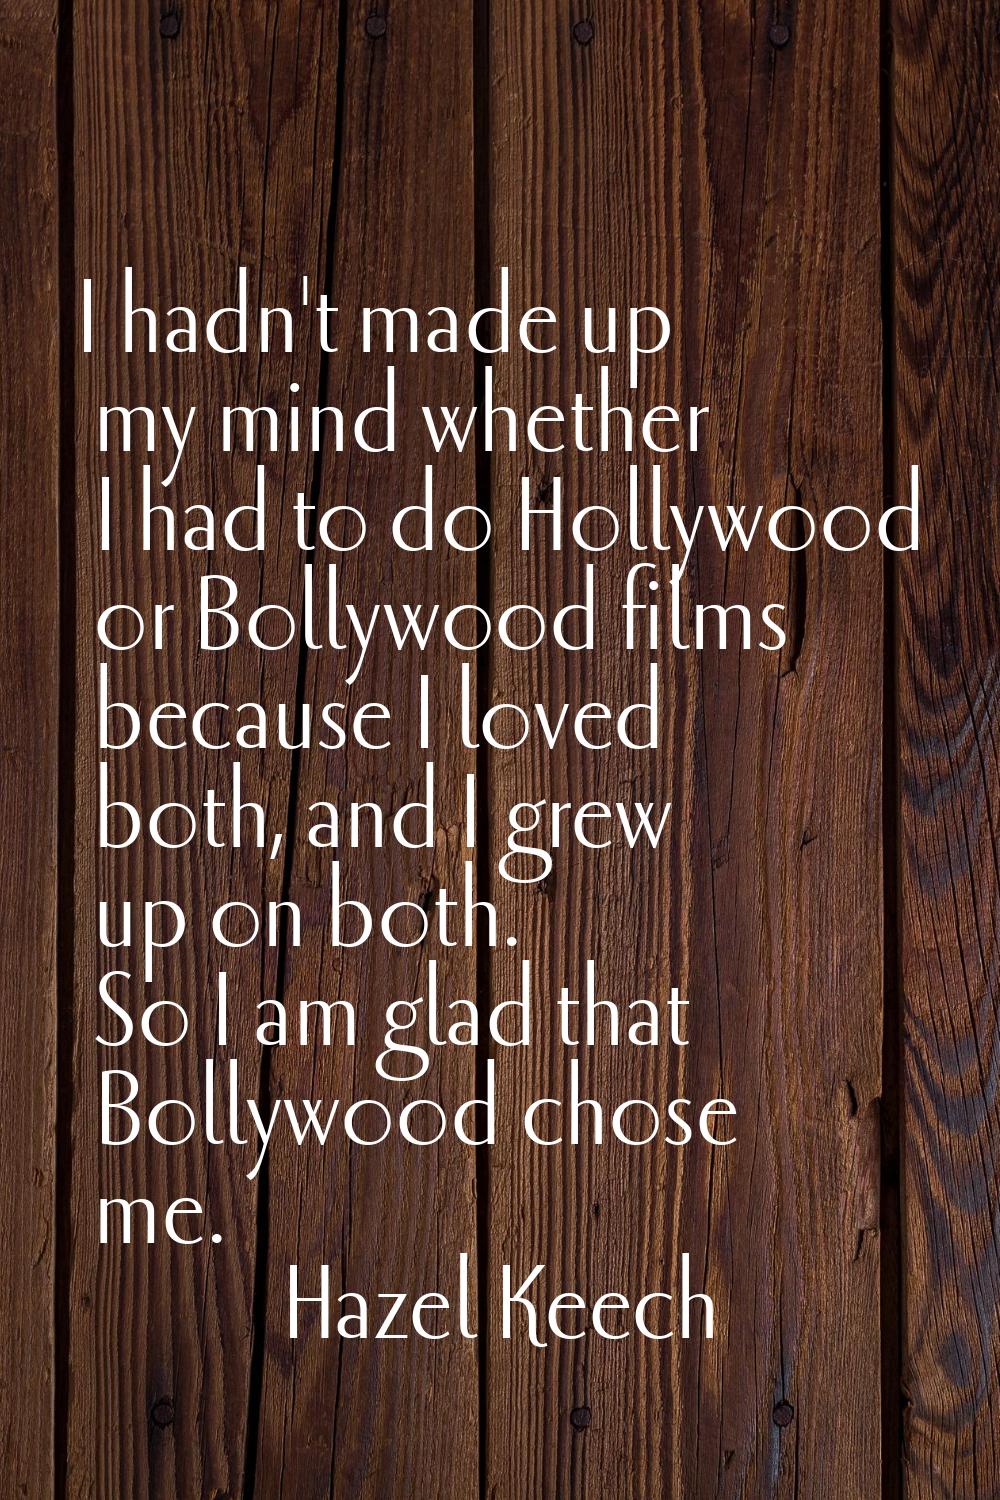 I hadn't made up my mind whether I had to do Hollywood or Bollywood films because I loved both, and